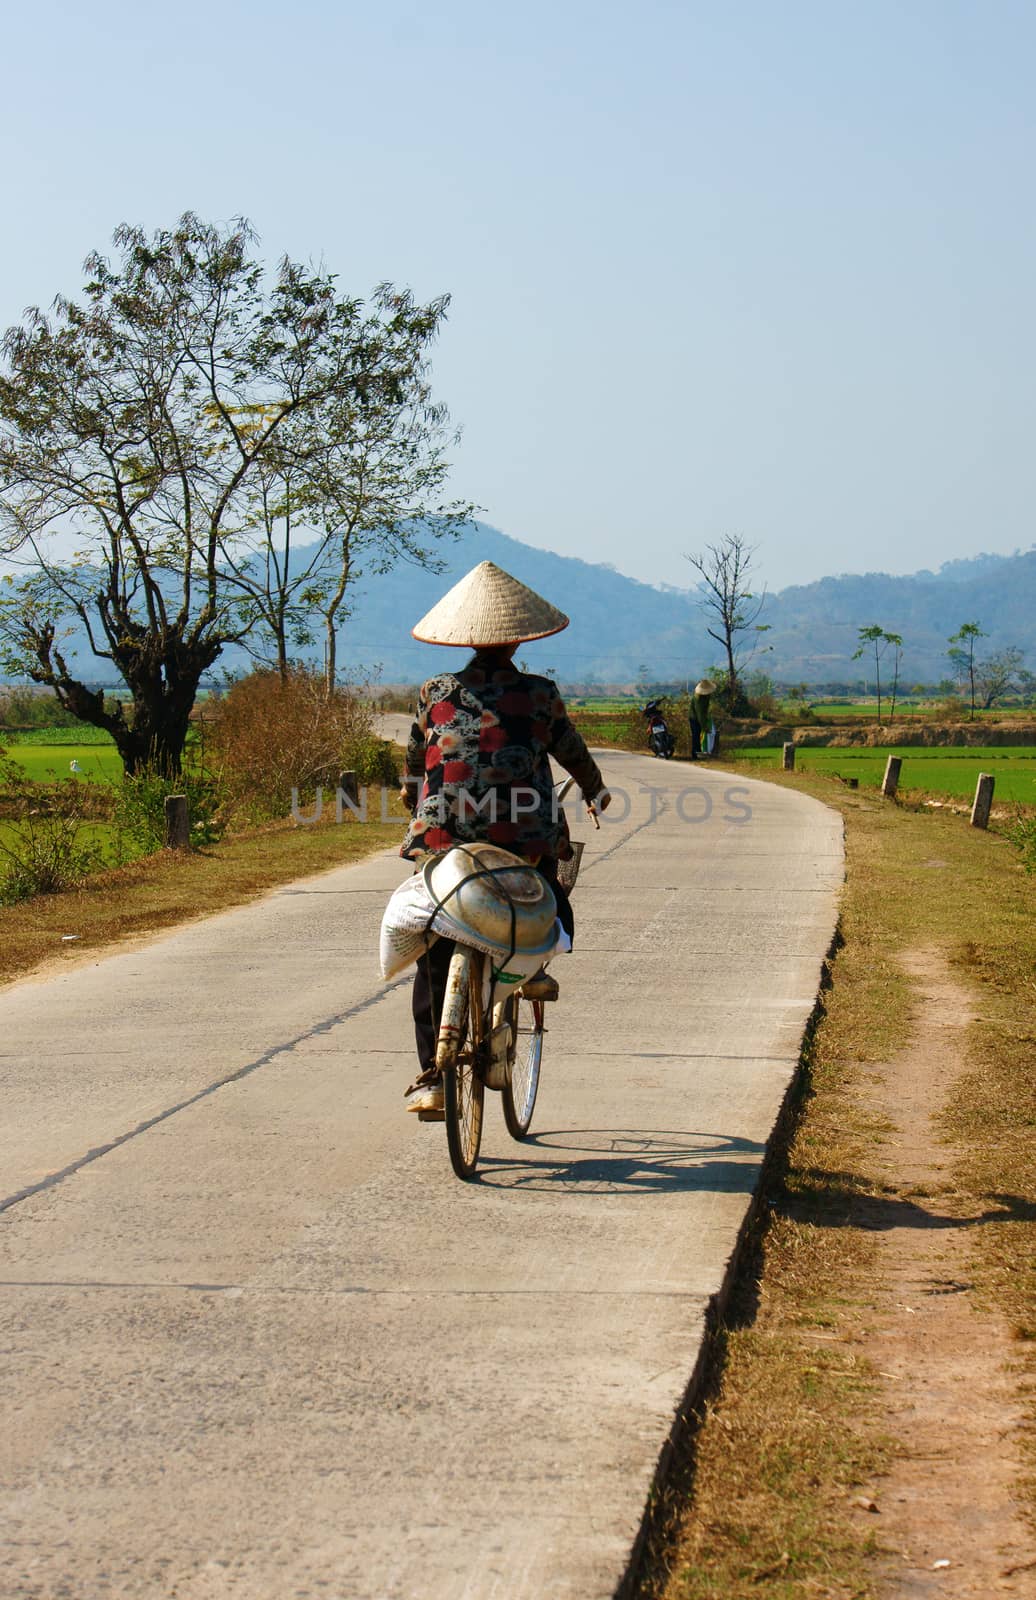 BUON ME THUOT, VIET NAM- FEB 7: Vietnamese woman riding bicycle on country road, beautiful of natural landscape at Daklak countryside, Vietnam, Feb 7, 2014